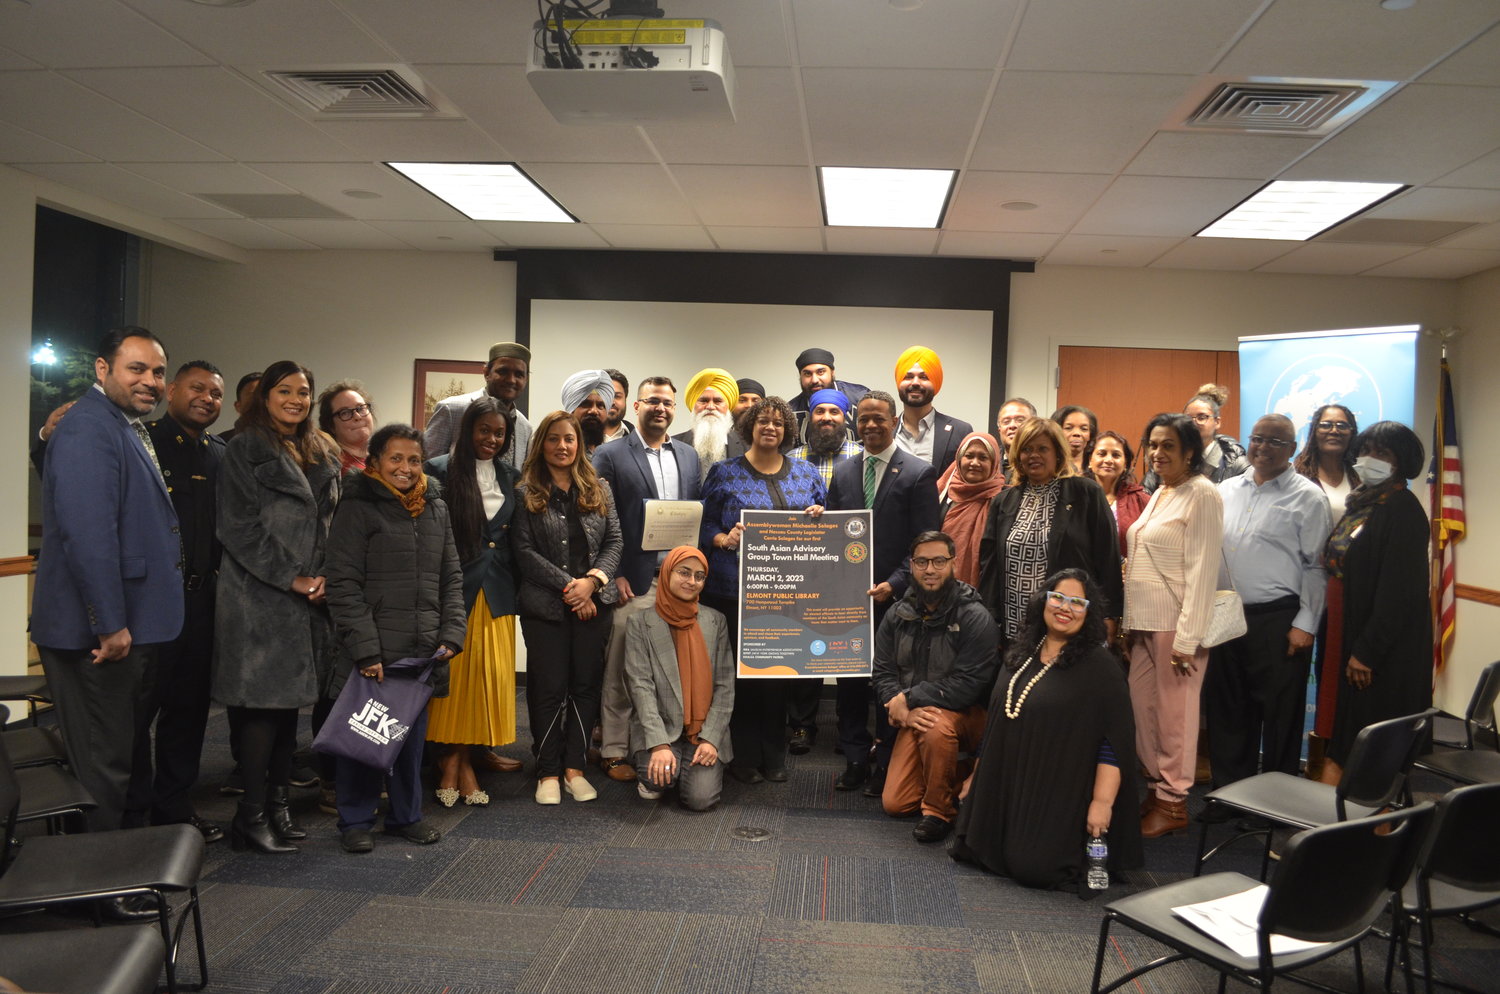 The first-ever South Asian Advisory Group Town Hall drew dozens of South Asian people from various backgrounds and neighborhoods, all with the goal of bringing awareness to important matters. Assemblywoman Michaelle Solages and Legislator Carrié Solages listened to their concerns and offered potential solutions going forward.